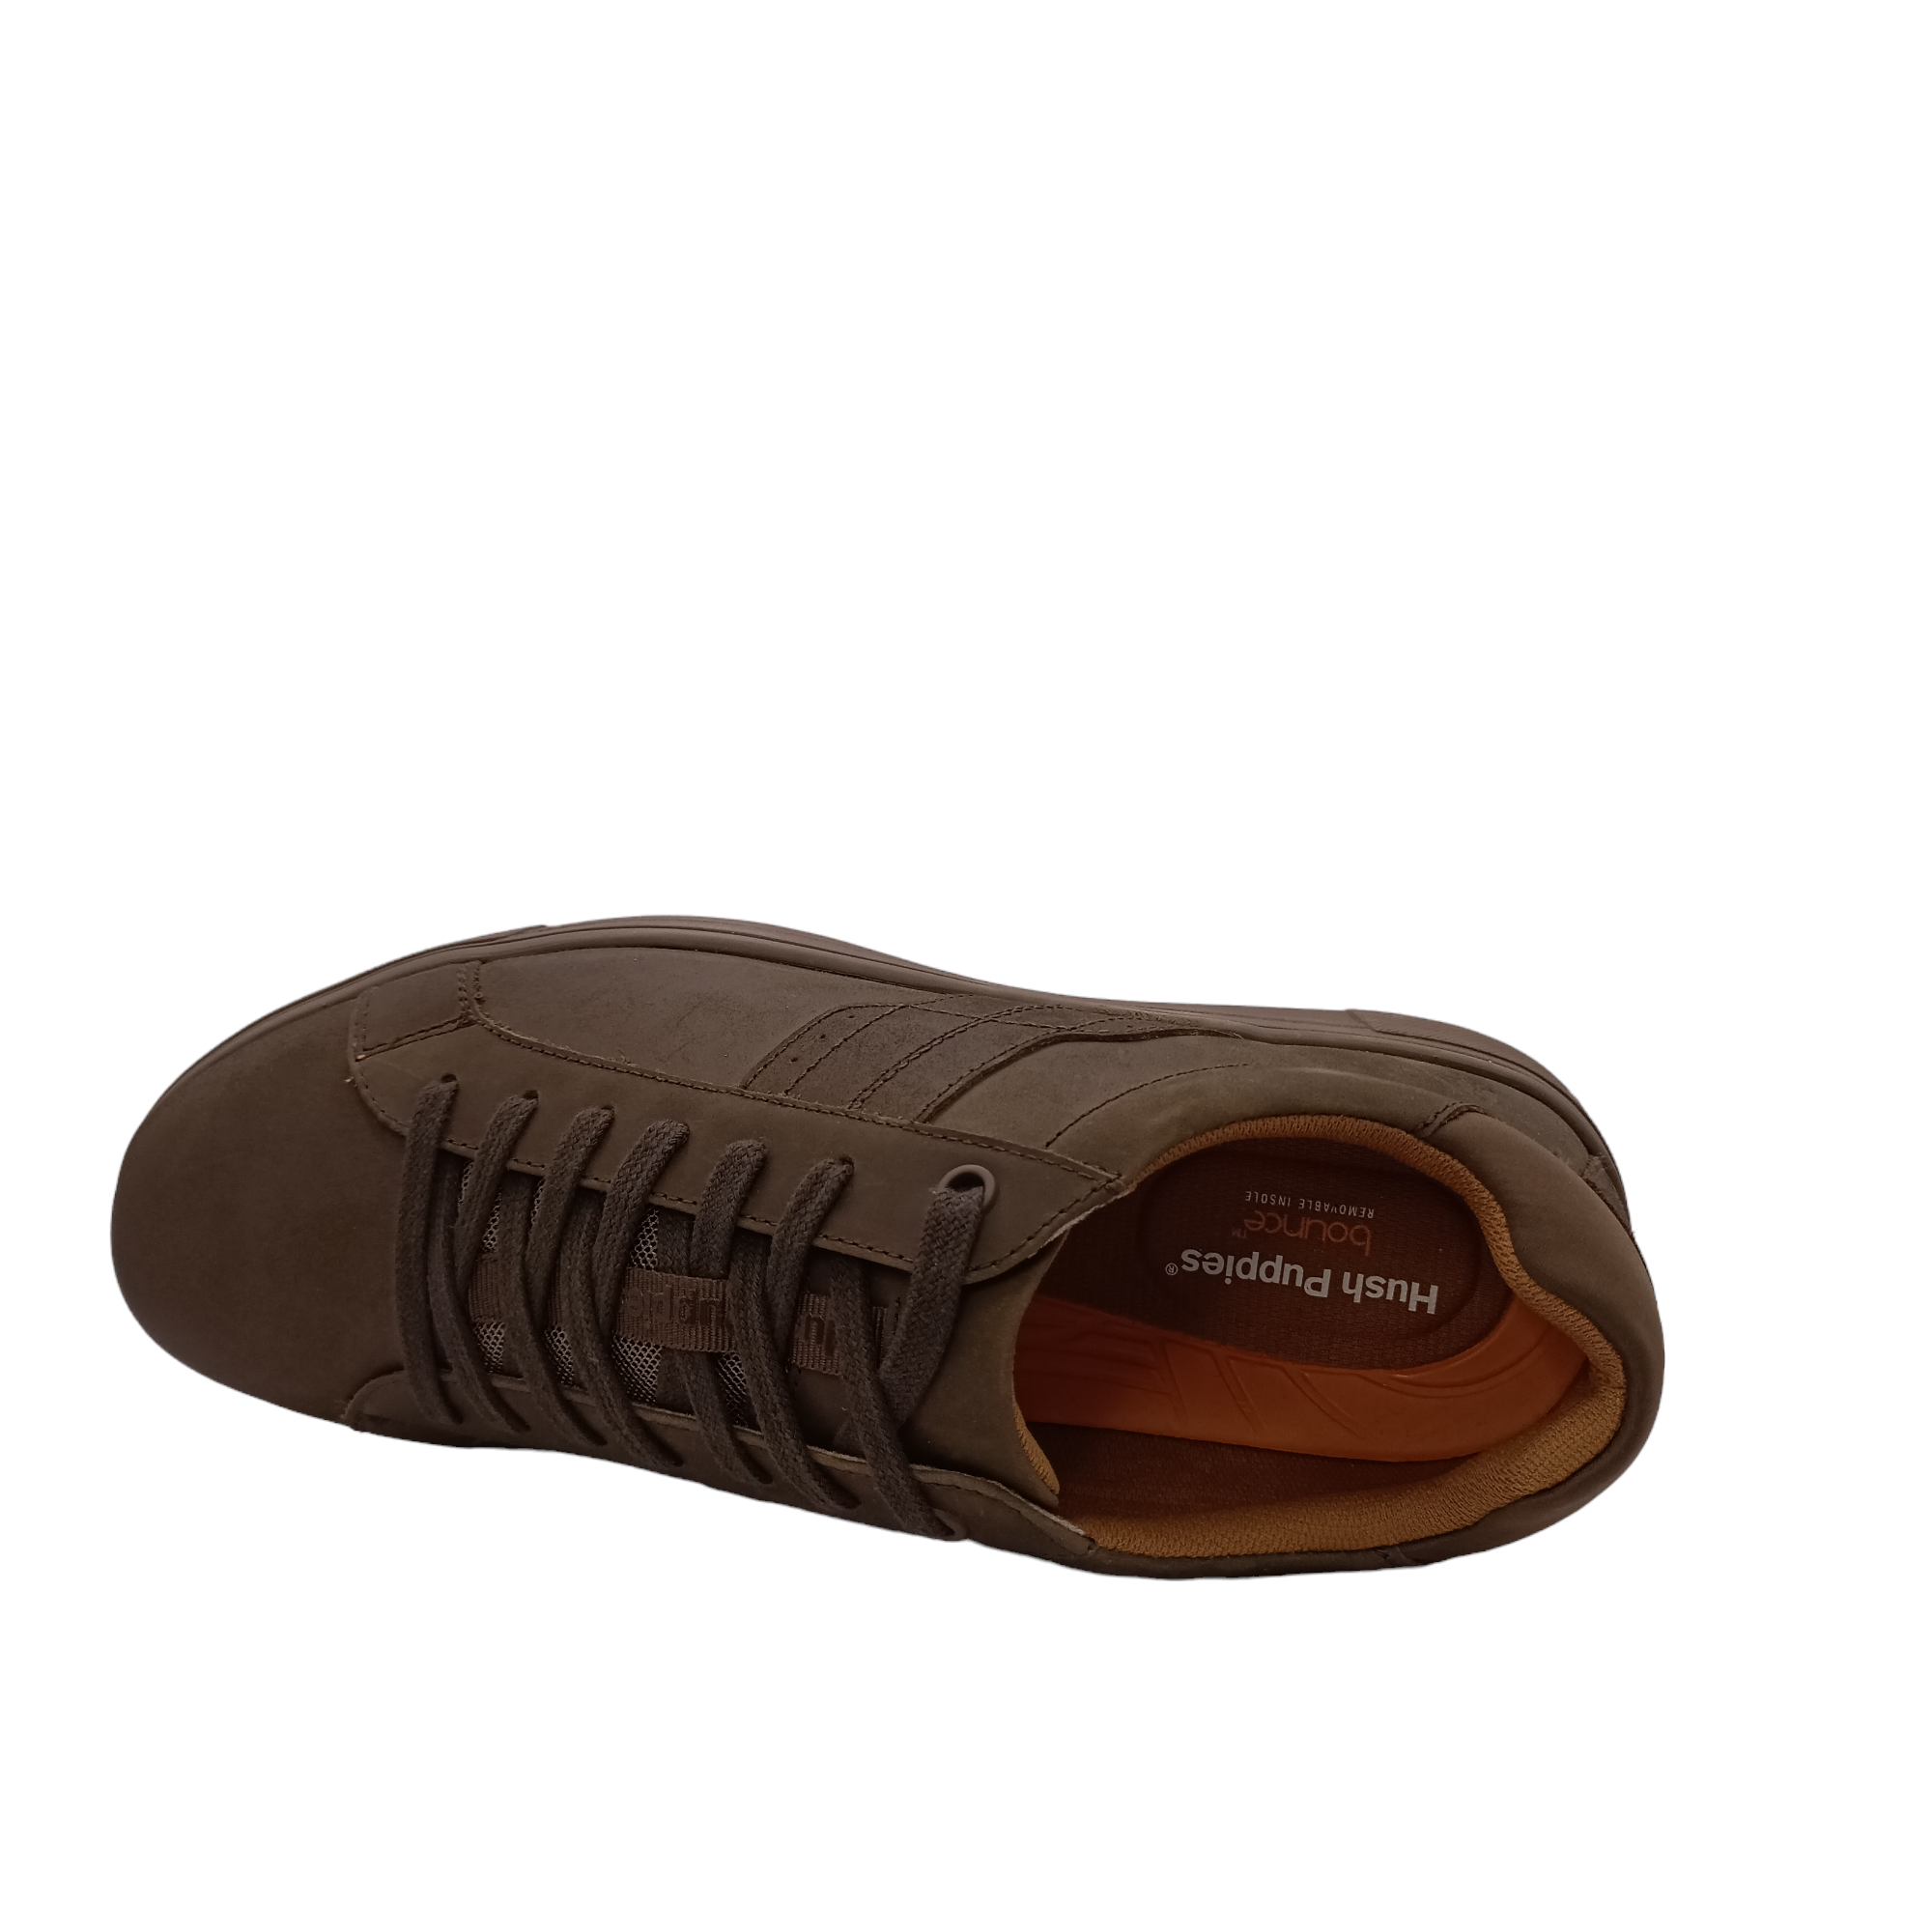 Gravity Leather from Hush Puppies.  Top view of brown oiled leather lace up shoe with dark brown flat laces. Lightening pattern from laces down to dark brown sole. Shop Online and In-store with shoe&amp;me Mount Maunganui